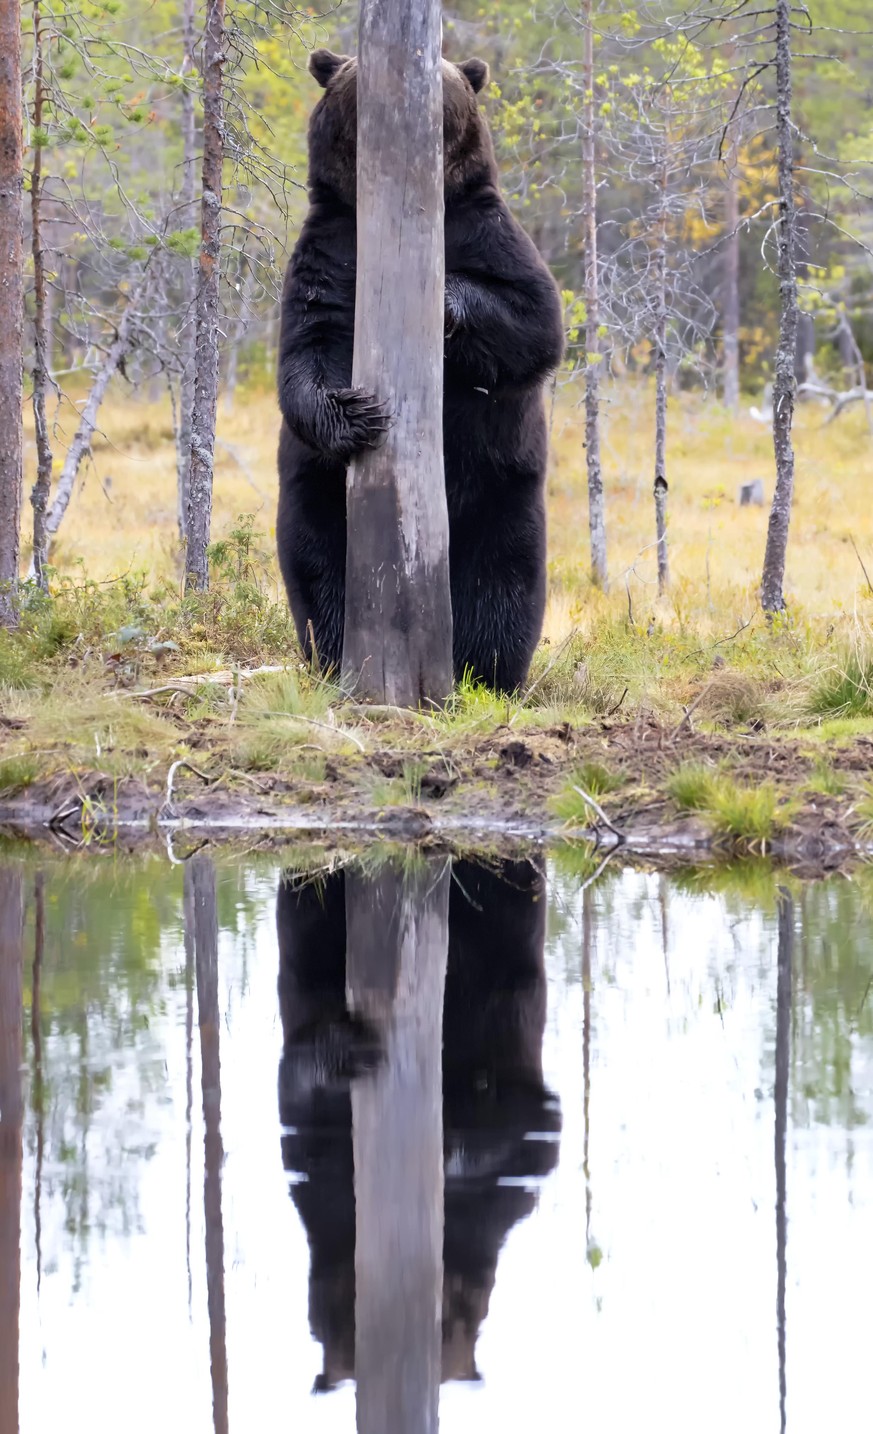 The Comedy Wildlife Photography Awards 2020
Esa Ringbom
Akaa
Finland
Phone: 
Email: 
Title: Doggo
Description: The photo was taken in Eastern Finland. In the picture, a brown bear is aiming for a piec ...